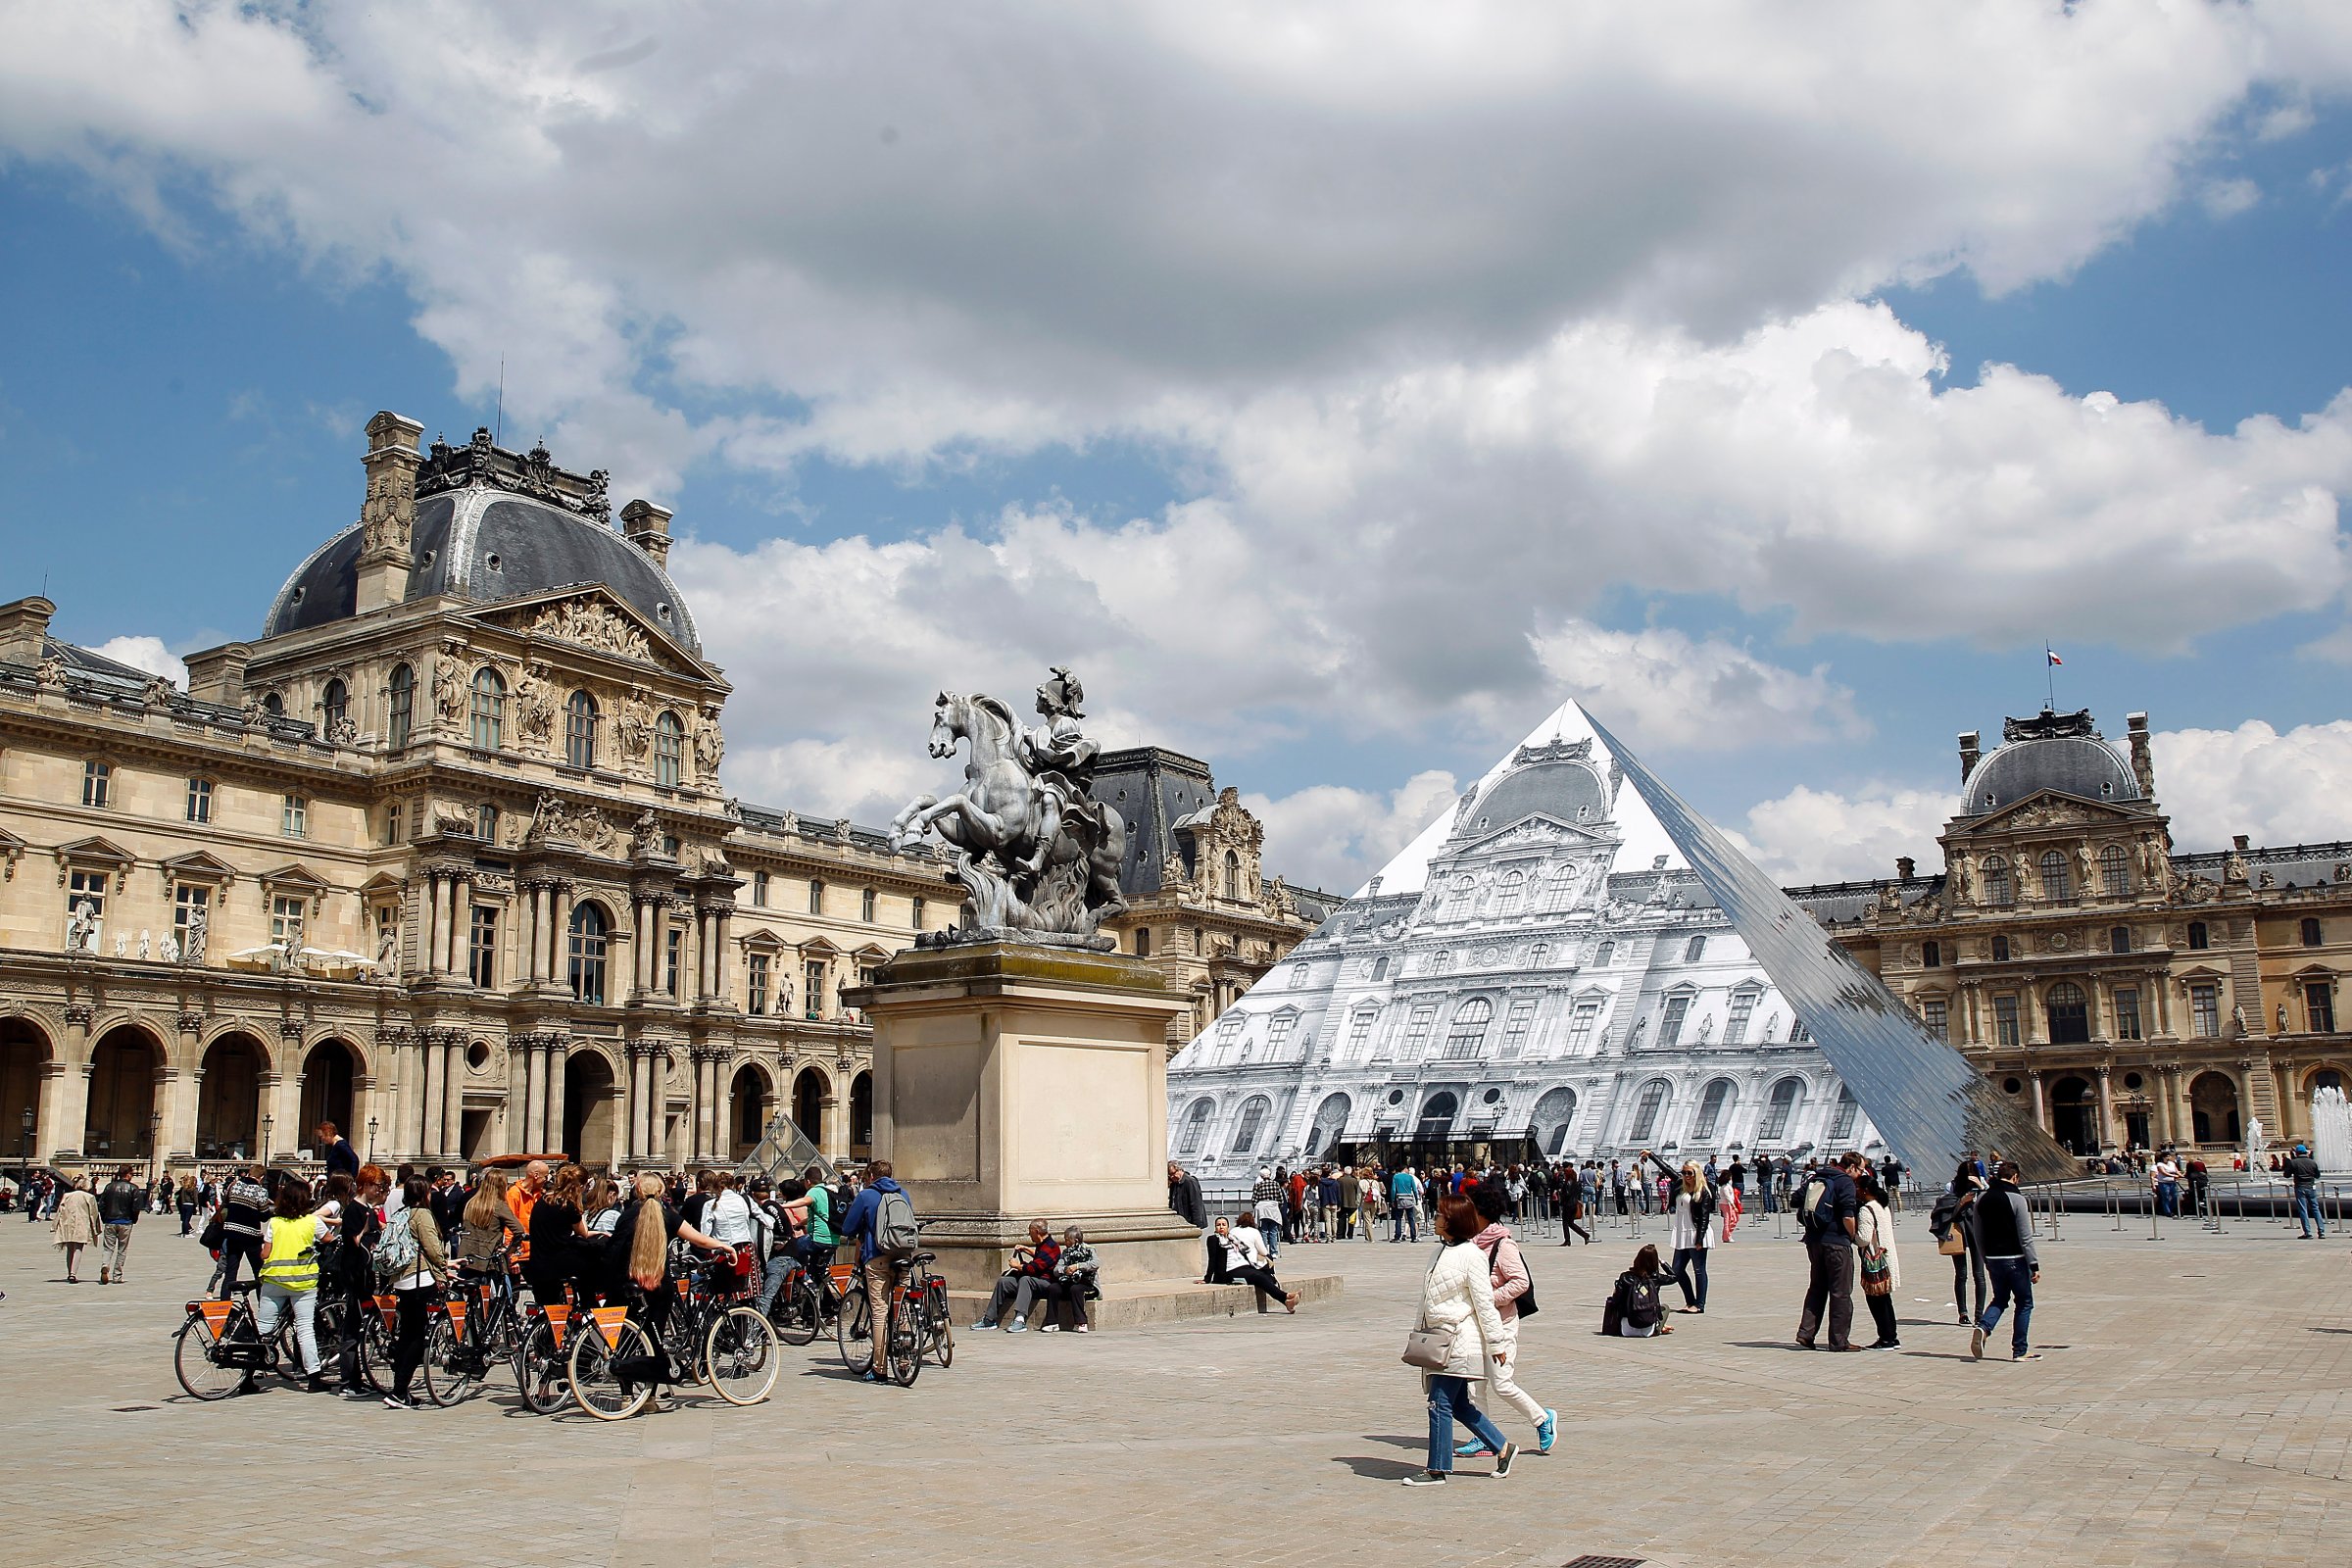 Artwork of French street artist and photographer JR is displayed on the Louvre Pyramid in Paris, May 25, 2016.